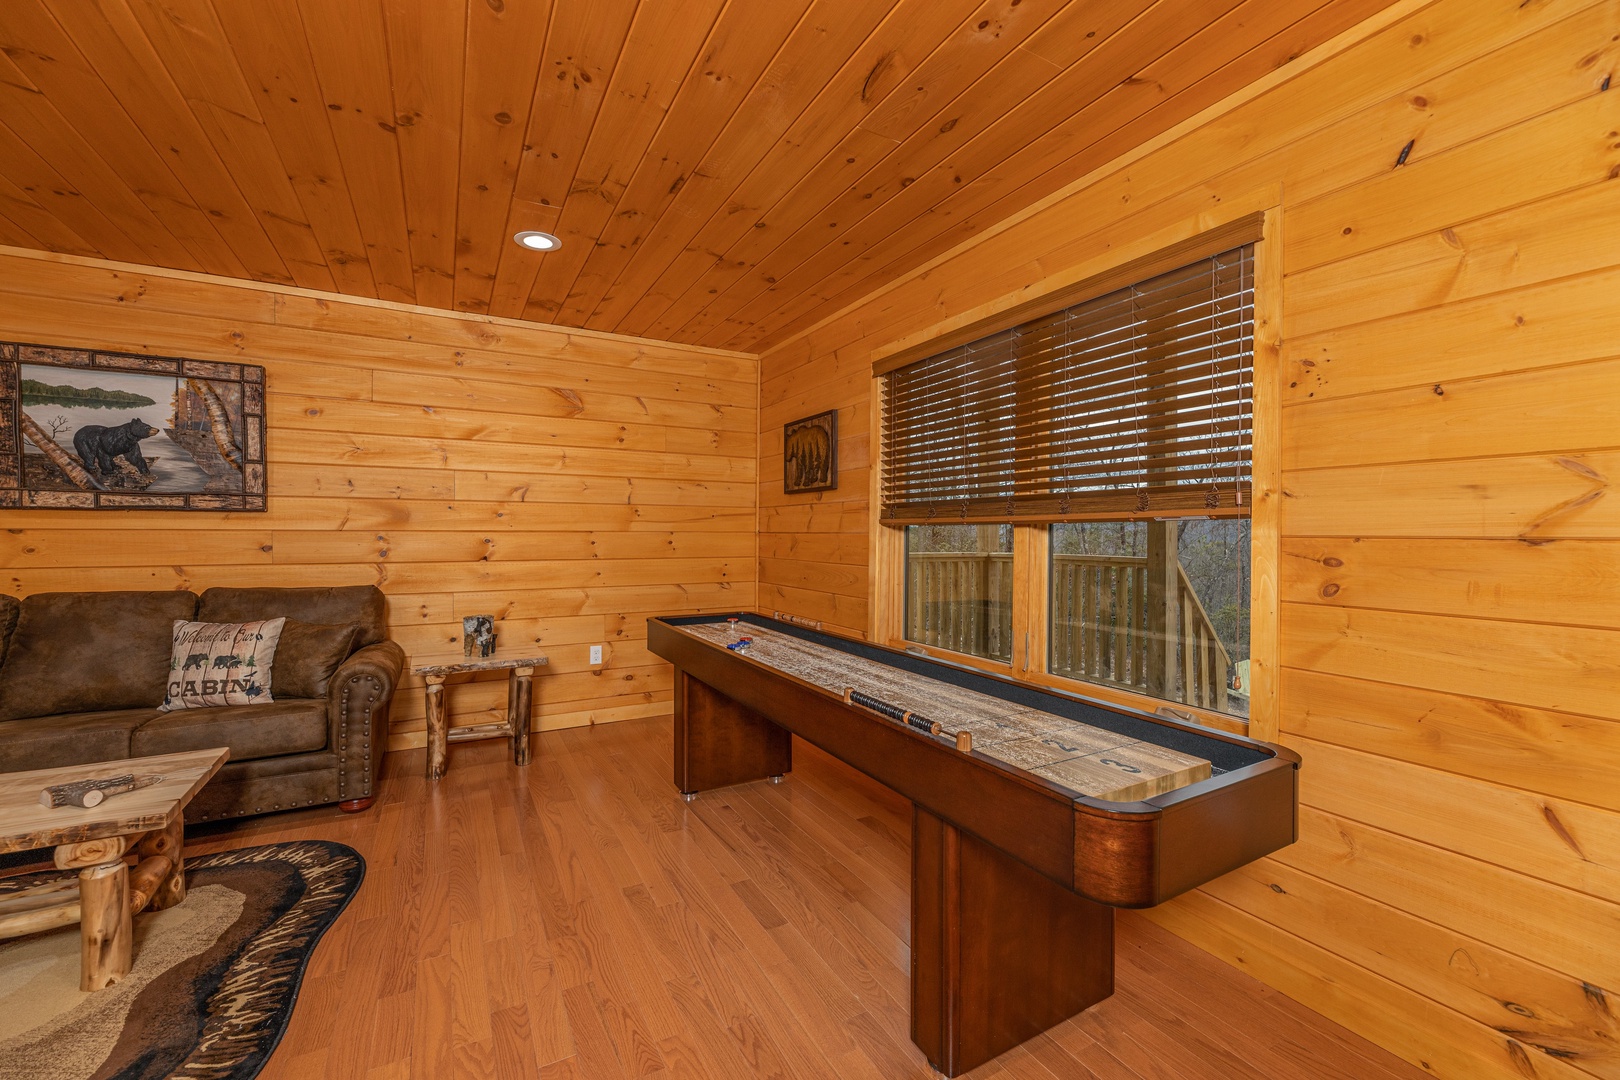 Shuffleboard game at J's Hideaway, a 4 bedroom cabin rental located in Pigeon Forge